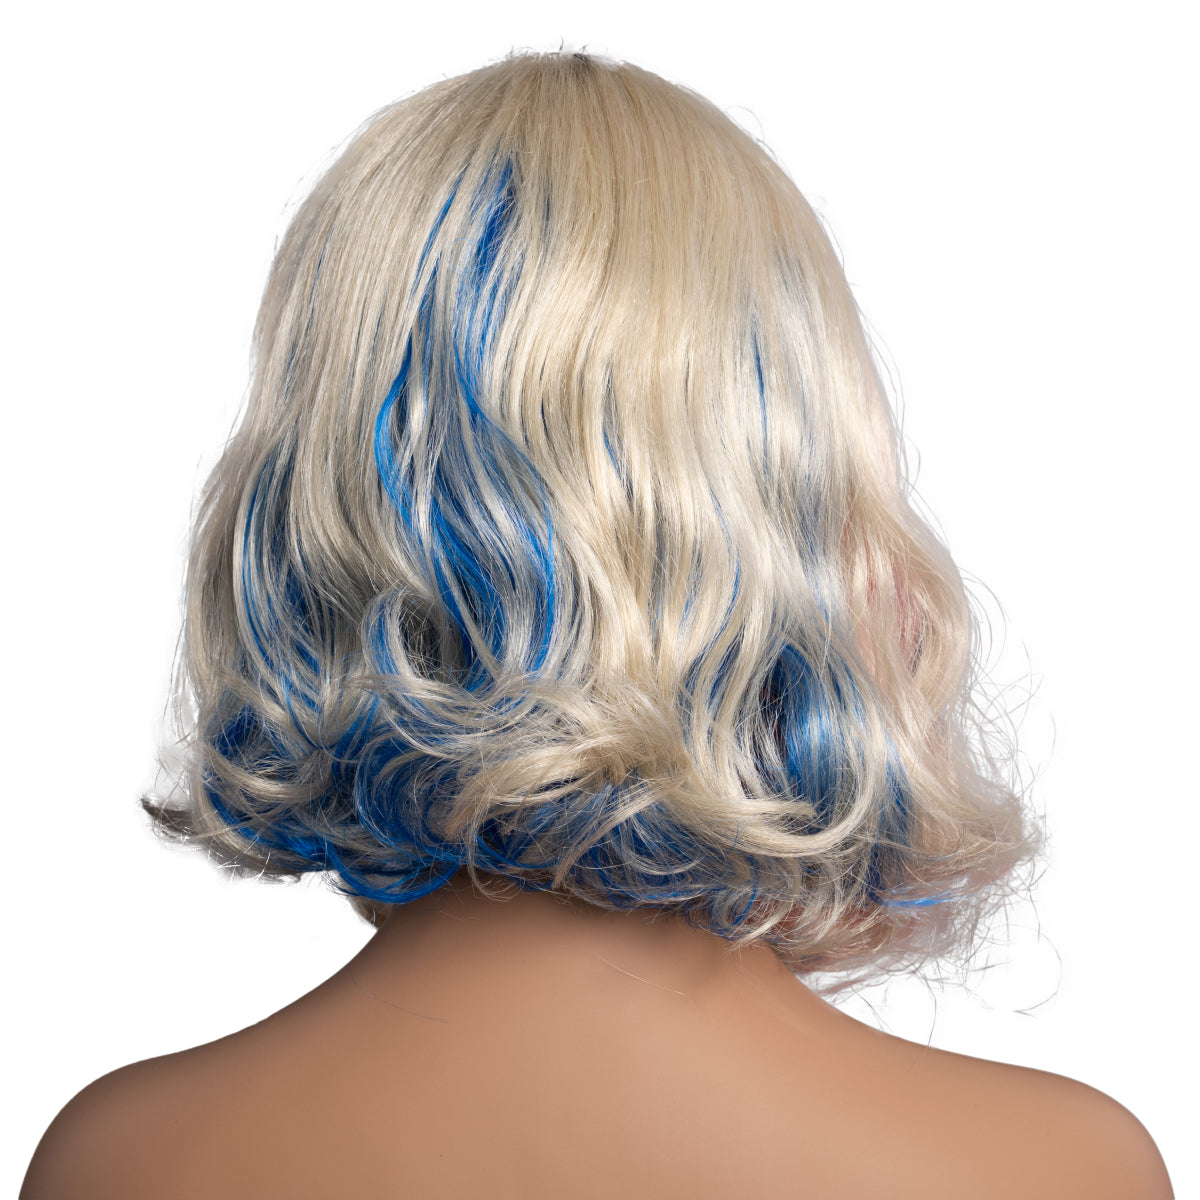 Enid Sinclair Netflix Wednesday TV Show costume Wig Back View